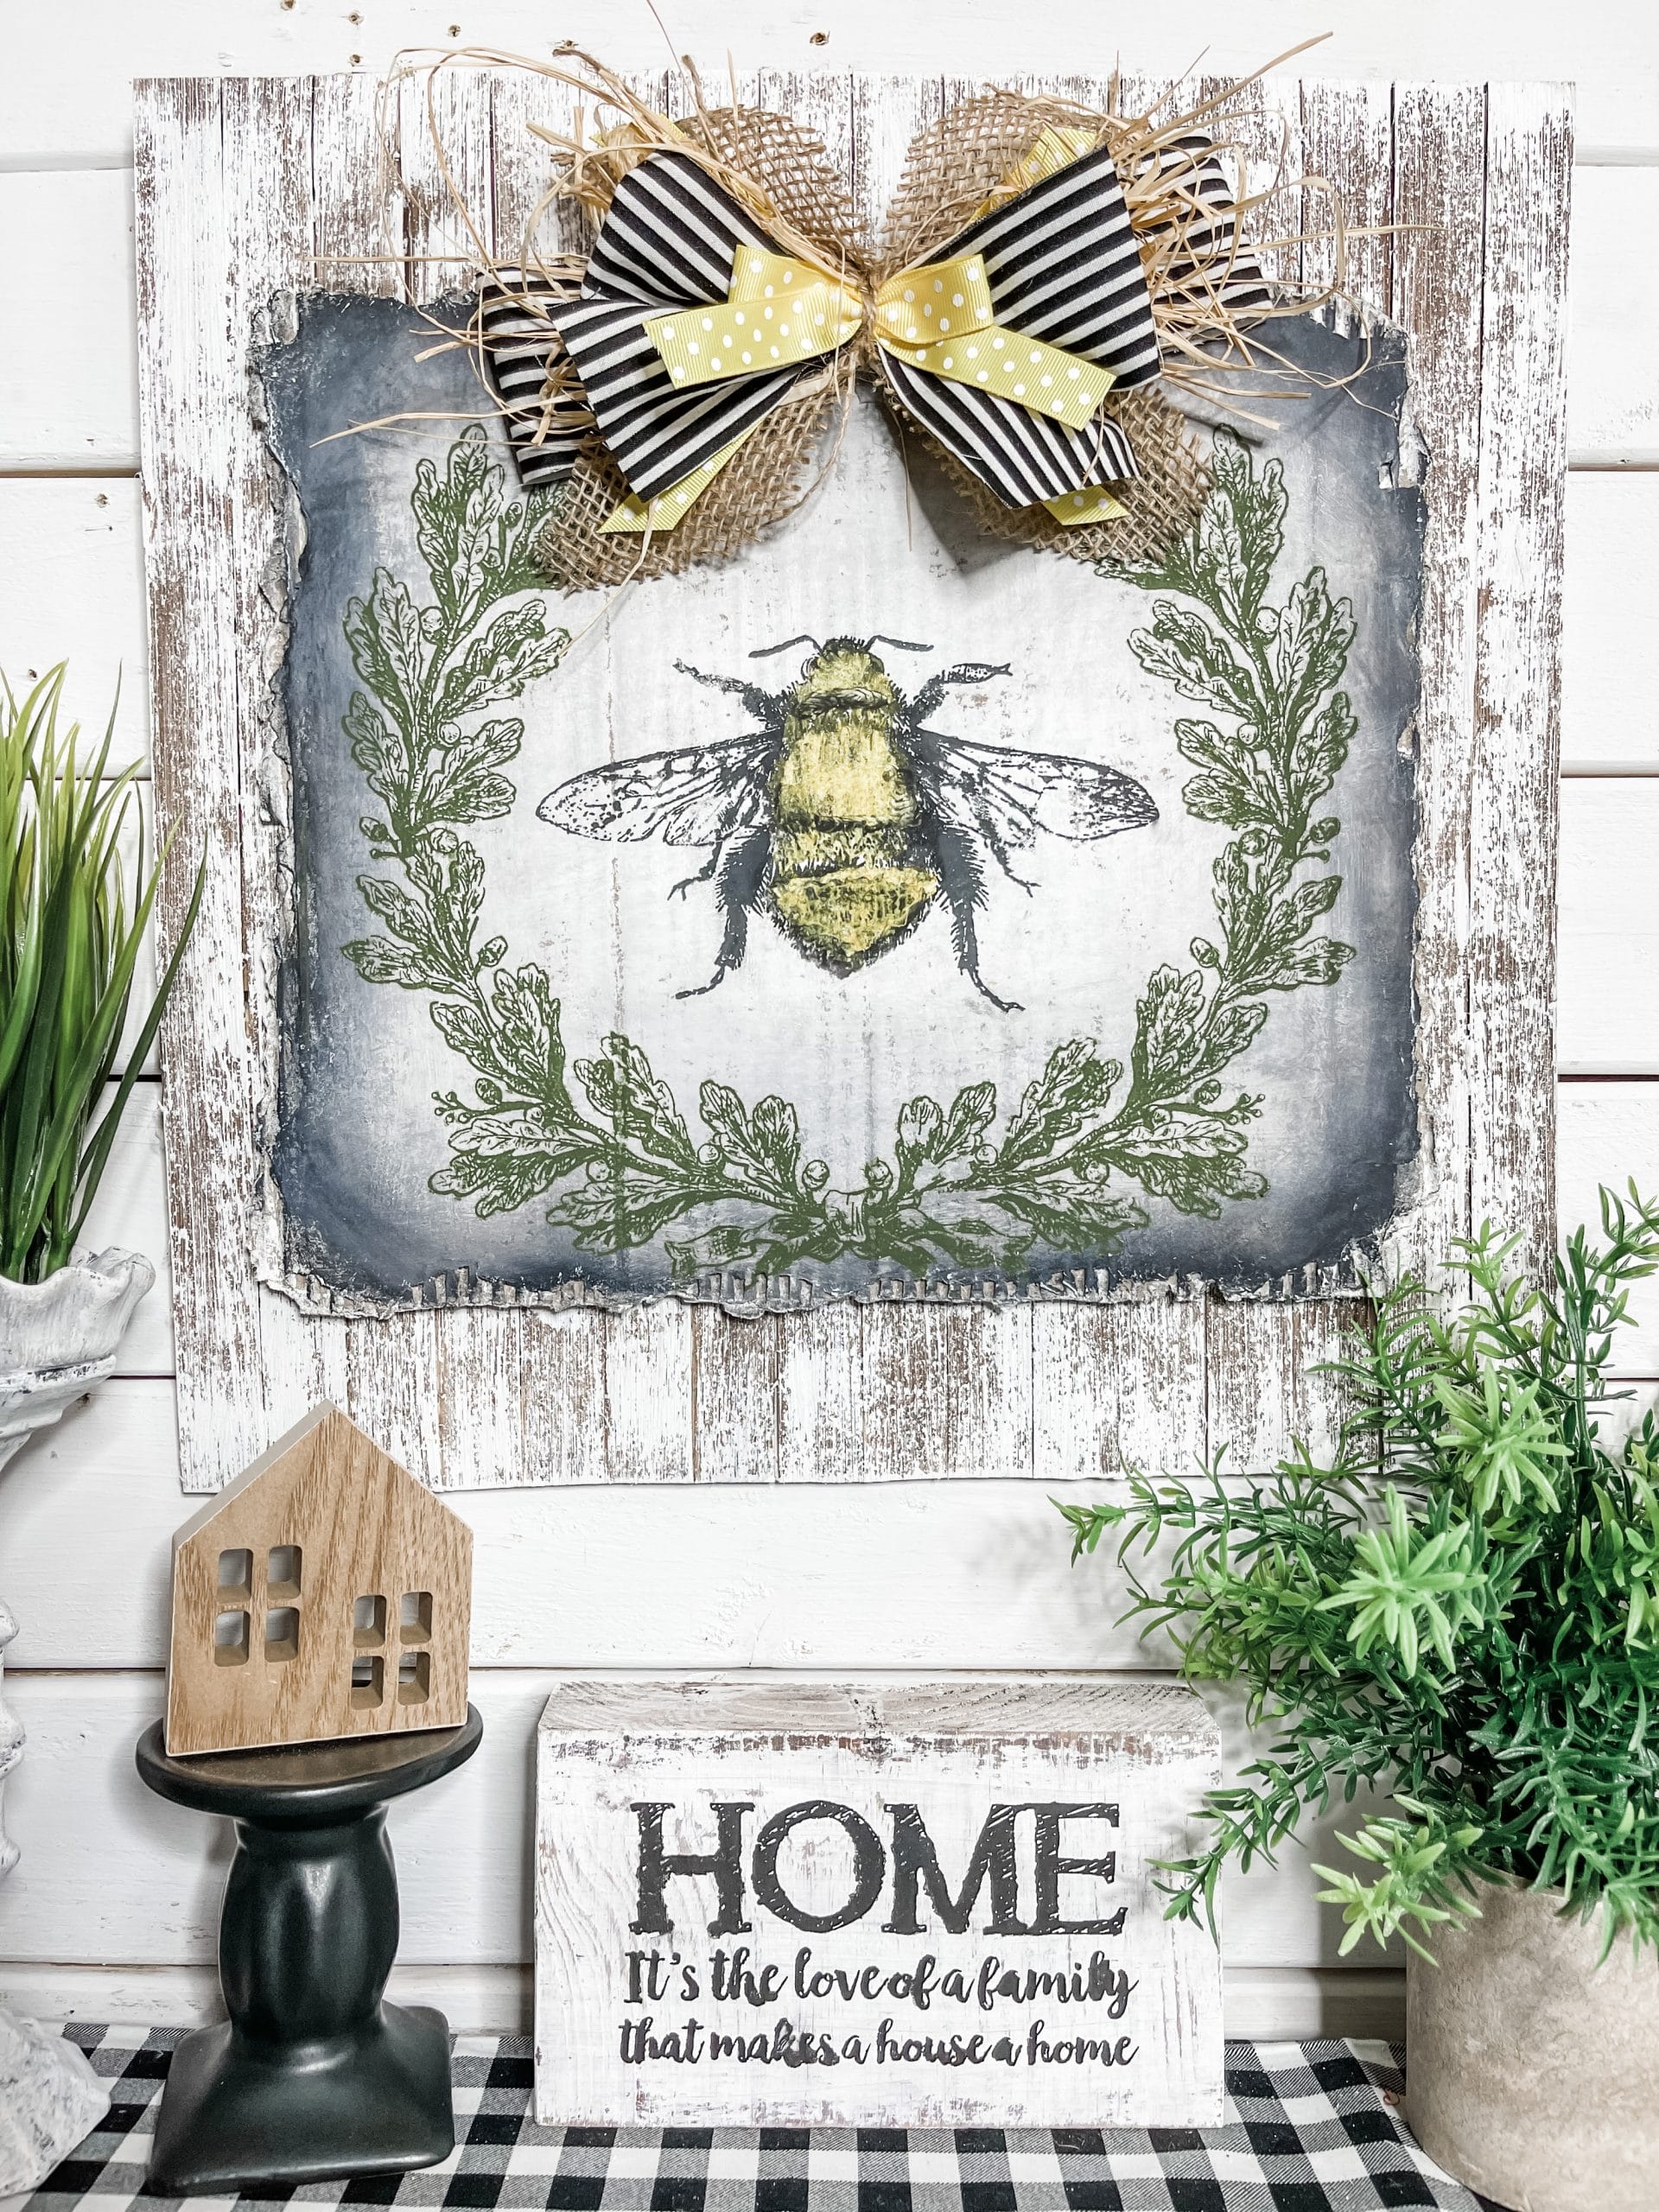 https://www.themakersmap.com/wp-content/uploads/2021/06/bumble-bee-farmhouse-home-decor-scaled.jpg